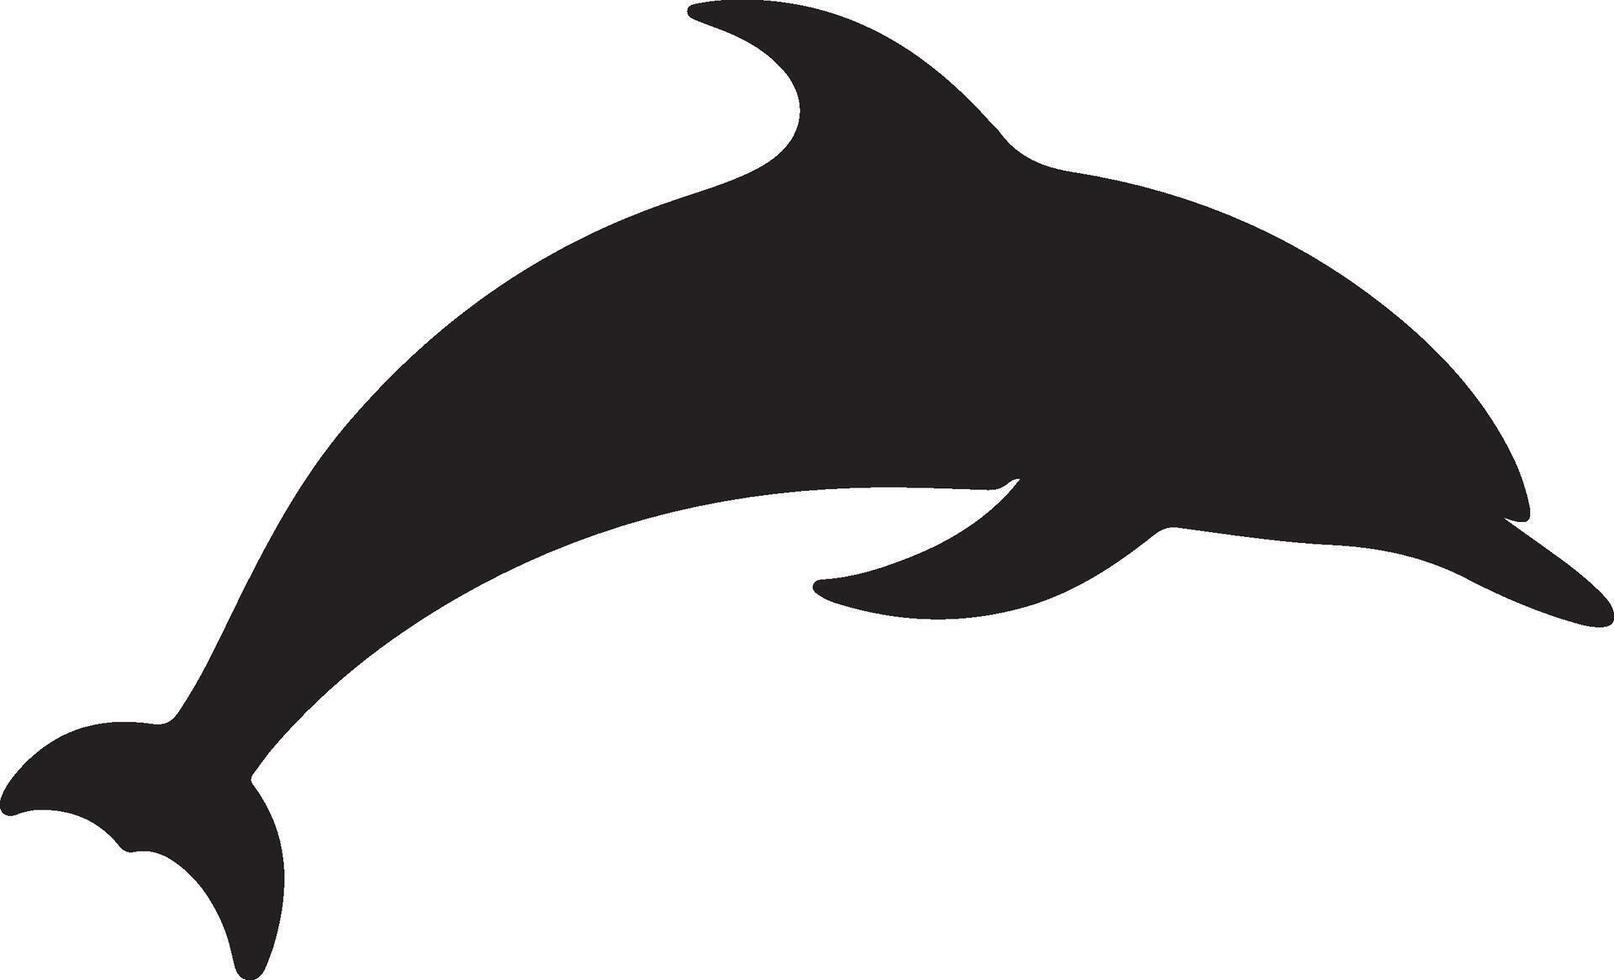 Dolphin Silhouette Vector Illustration White Background